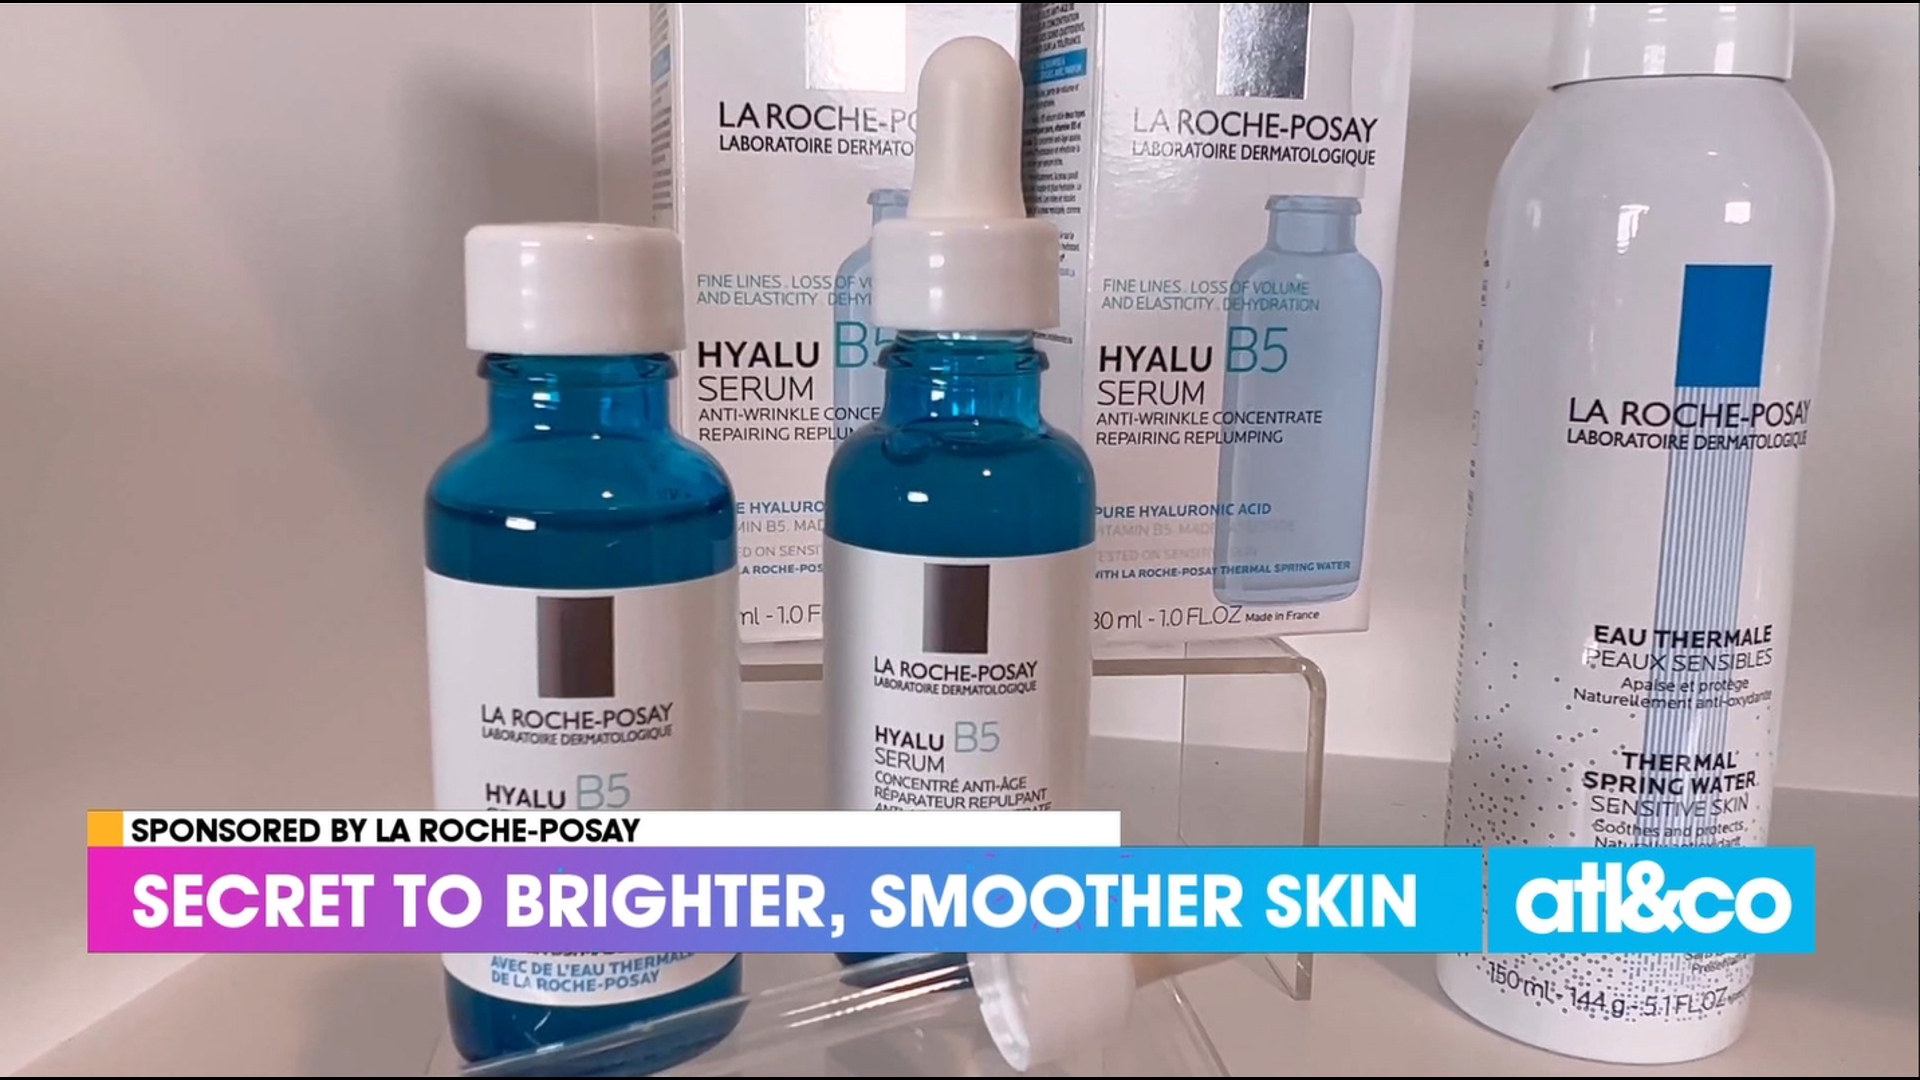 Experience La Roche-Posay Skincare Collections, formulated for all skin types and concerns.